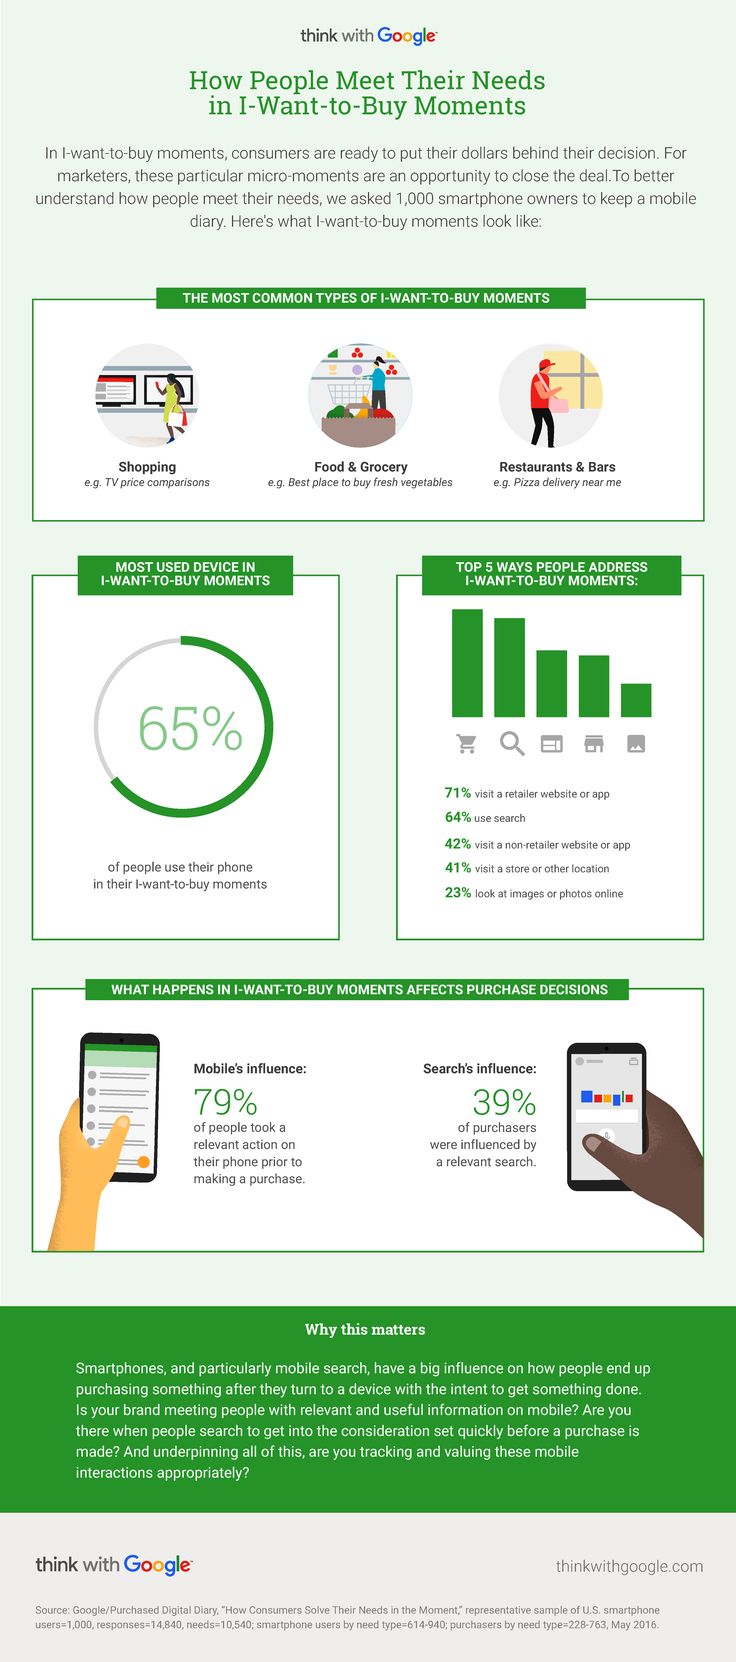 Marketing-Infographic-How-People-Meet-Their-Needs-in-I-Want-to-Buy-Moments.-📲-In-I-want-to-buy-mom Marketing Infographic : How People Meet Their Needs in I-Want-to-Buy Moments. 📲  In I-want-to-buy mom...